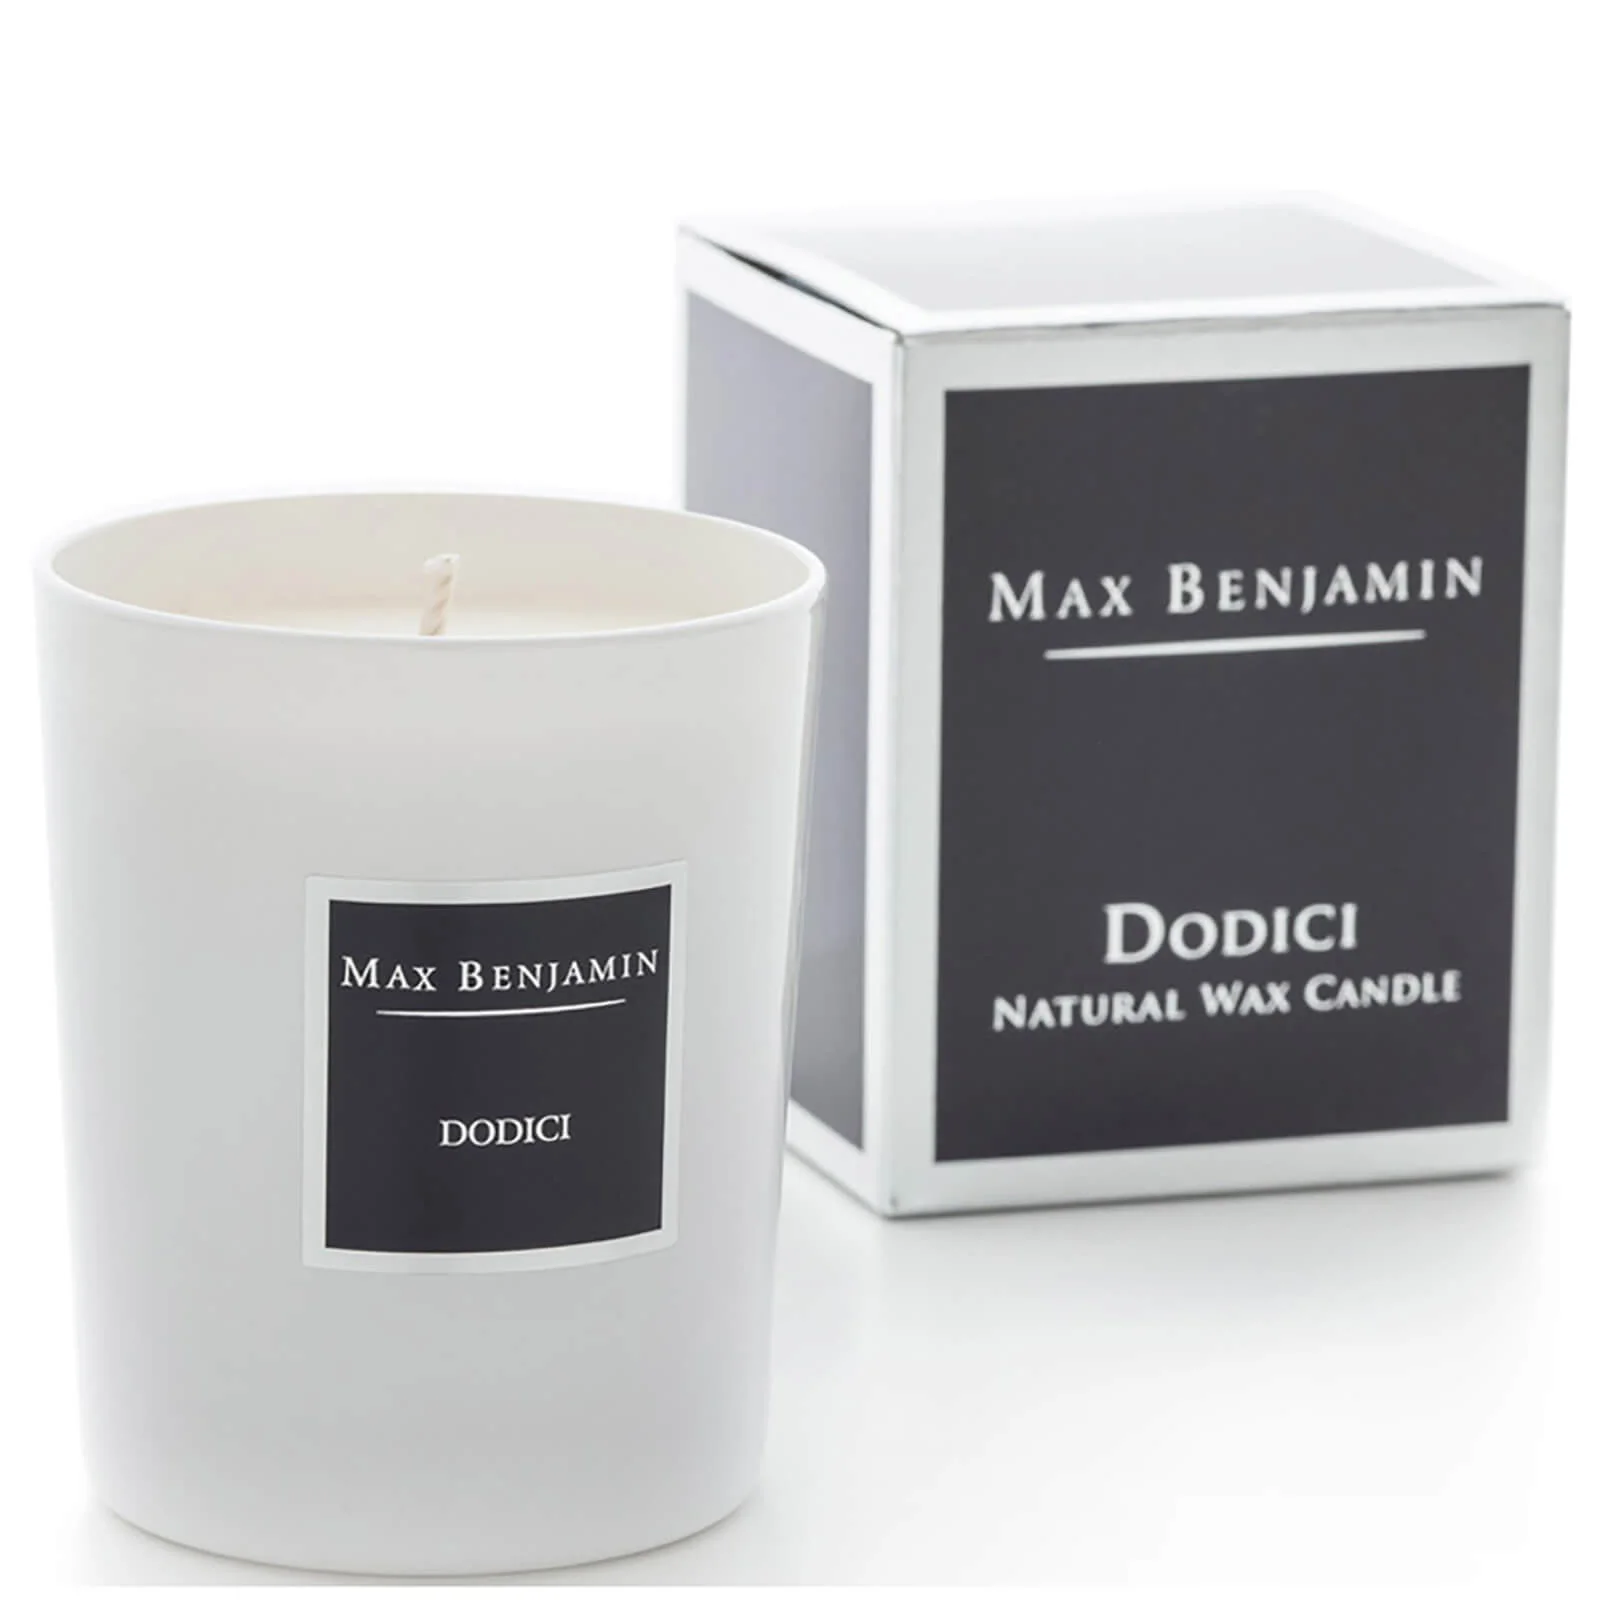 Max Benjamin Scented Glass Candle in Gift Box - Dodici Image 1